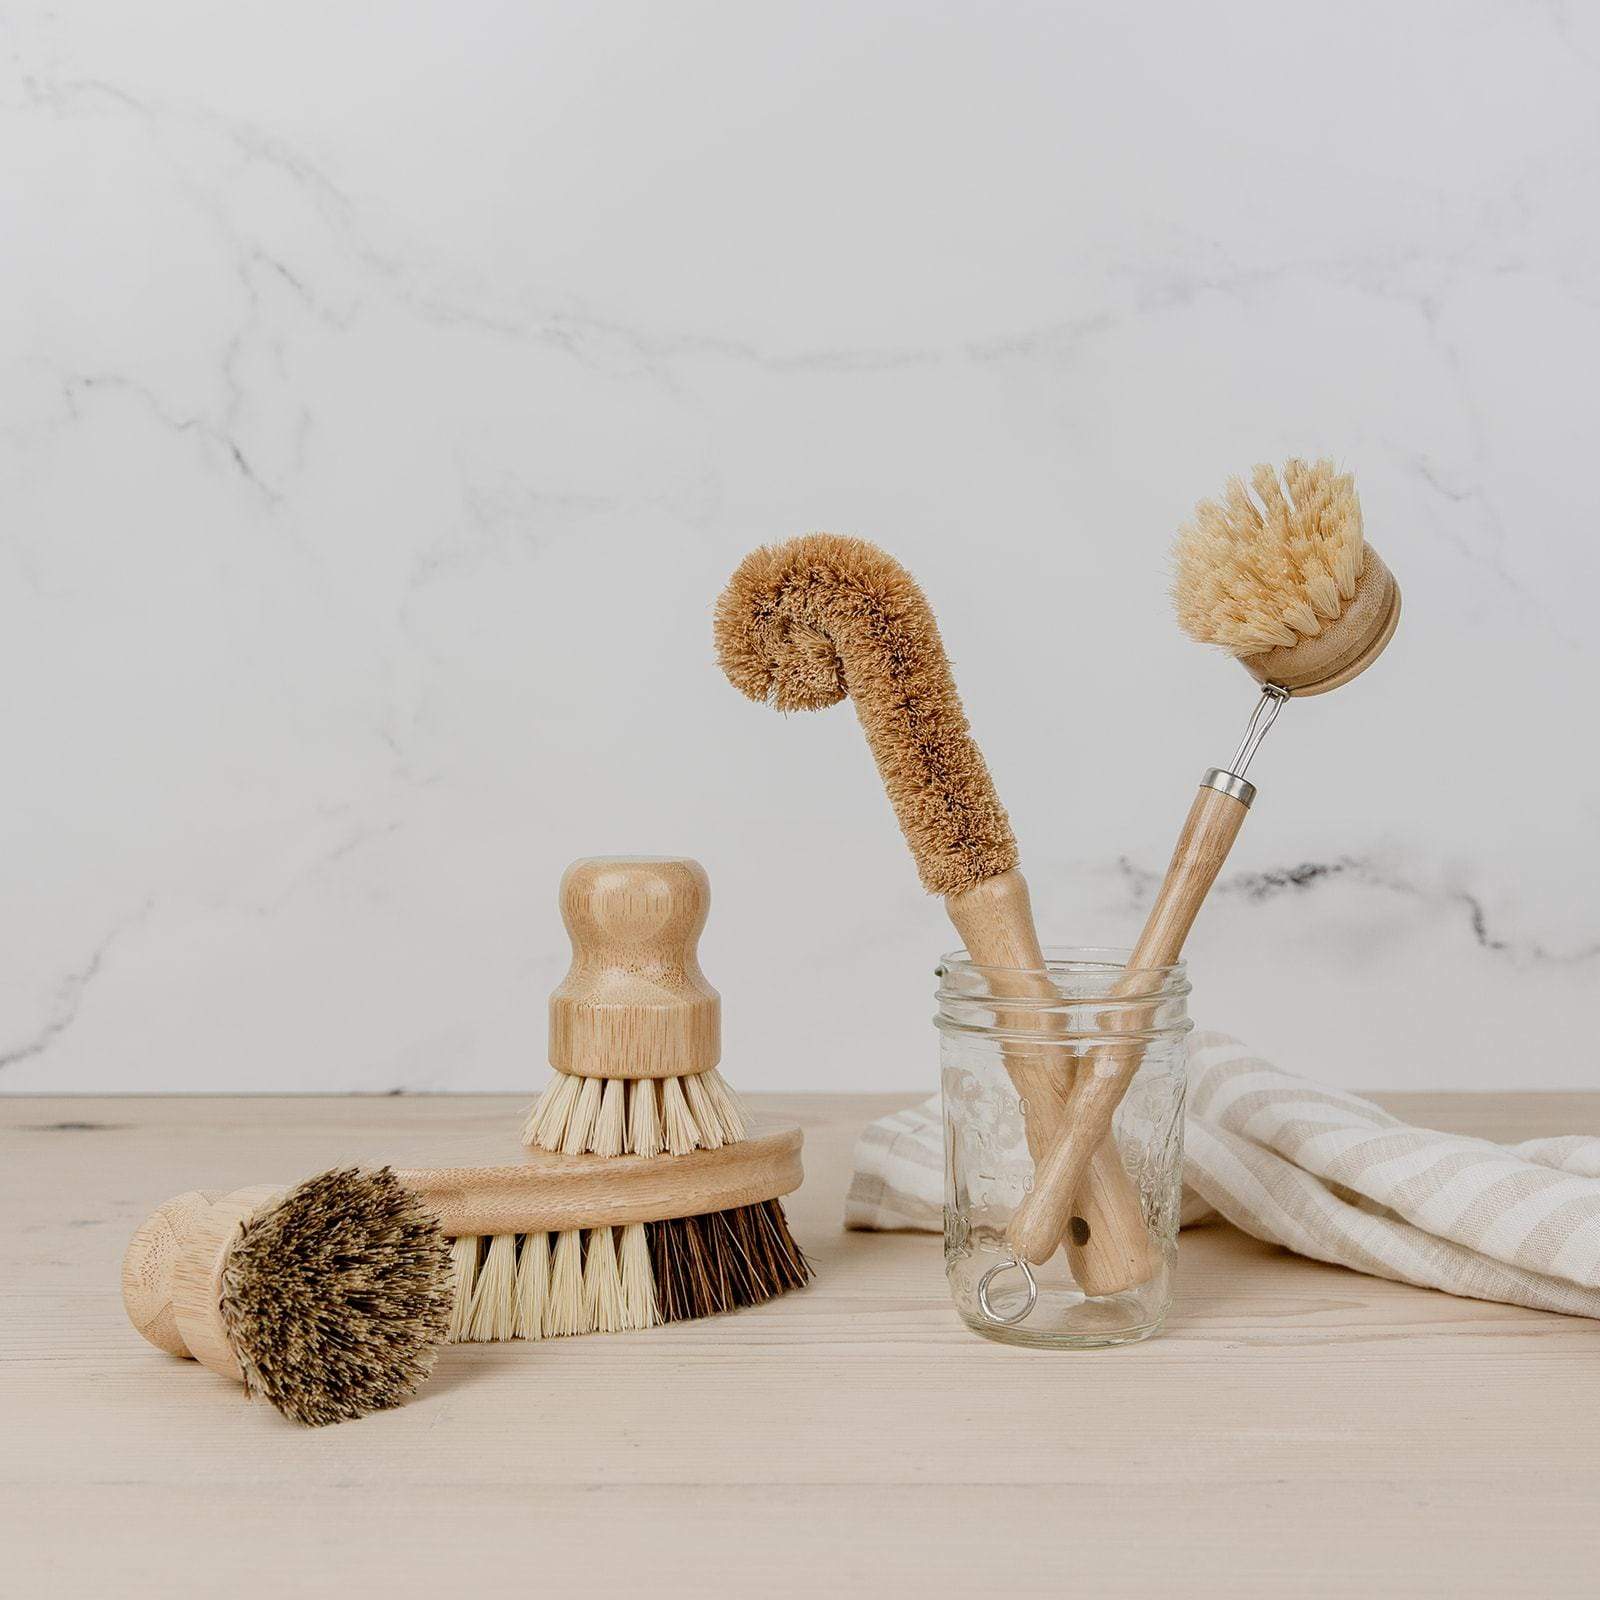 all 5 brushes from the zero waste dish brush kit on a countertop. Bottle brush and long handled brush are in a glass jar, the others are on the counter.